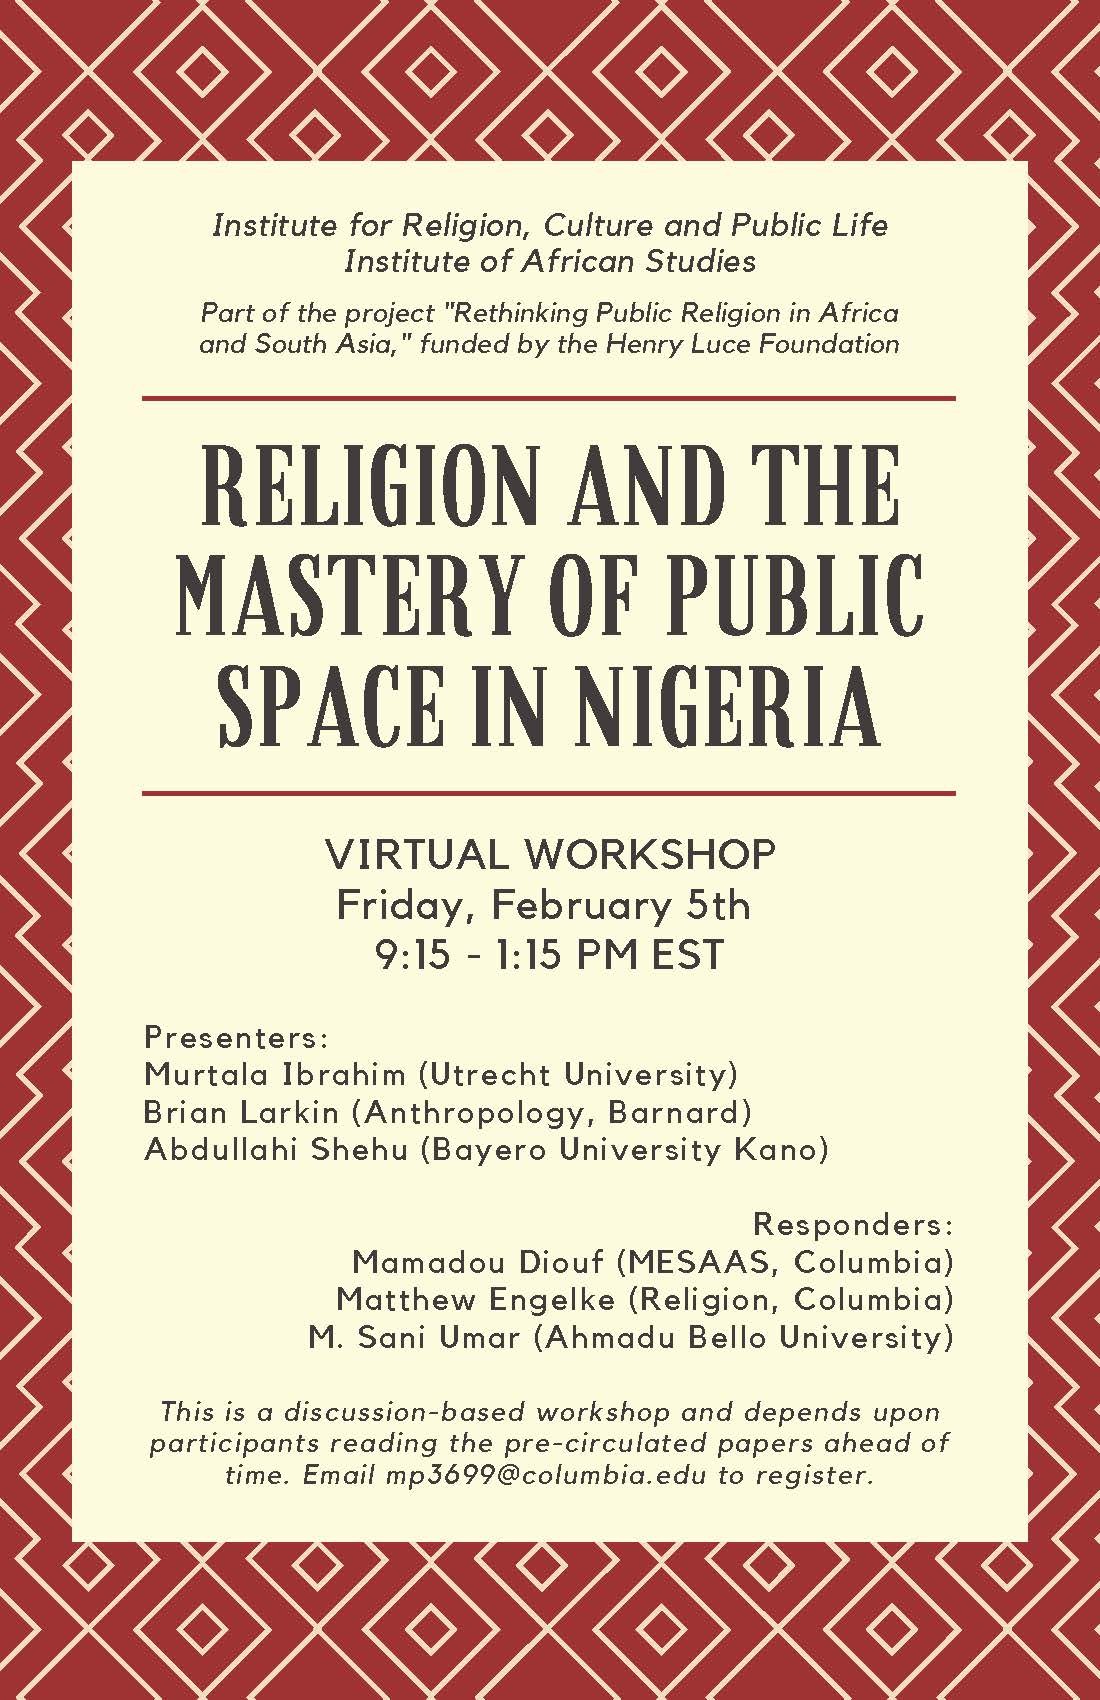 Poster: Religion and the mastery of public space in Nigeria